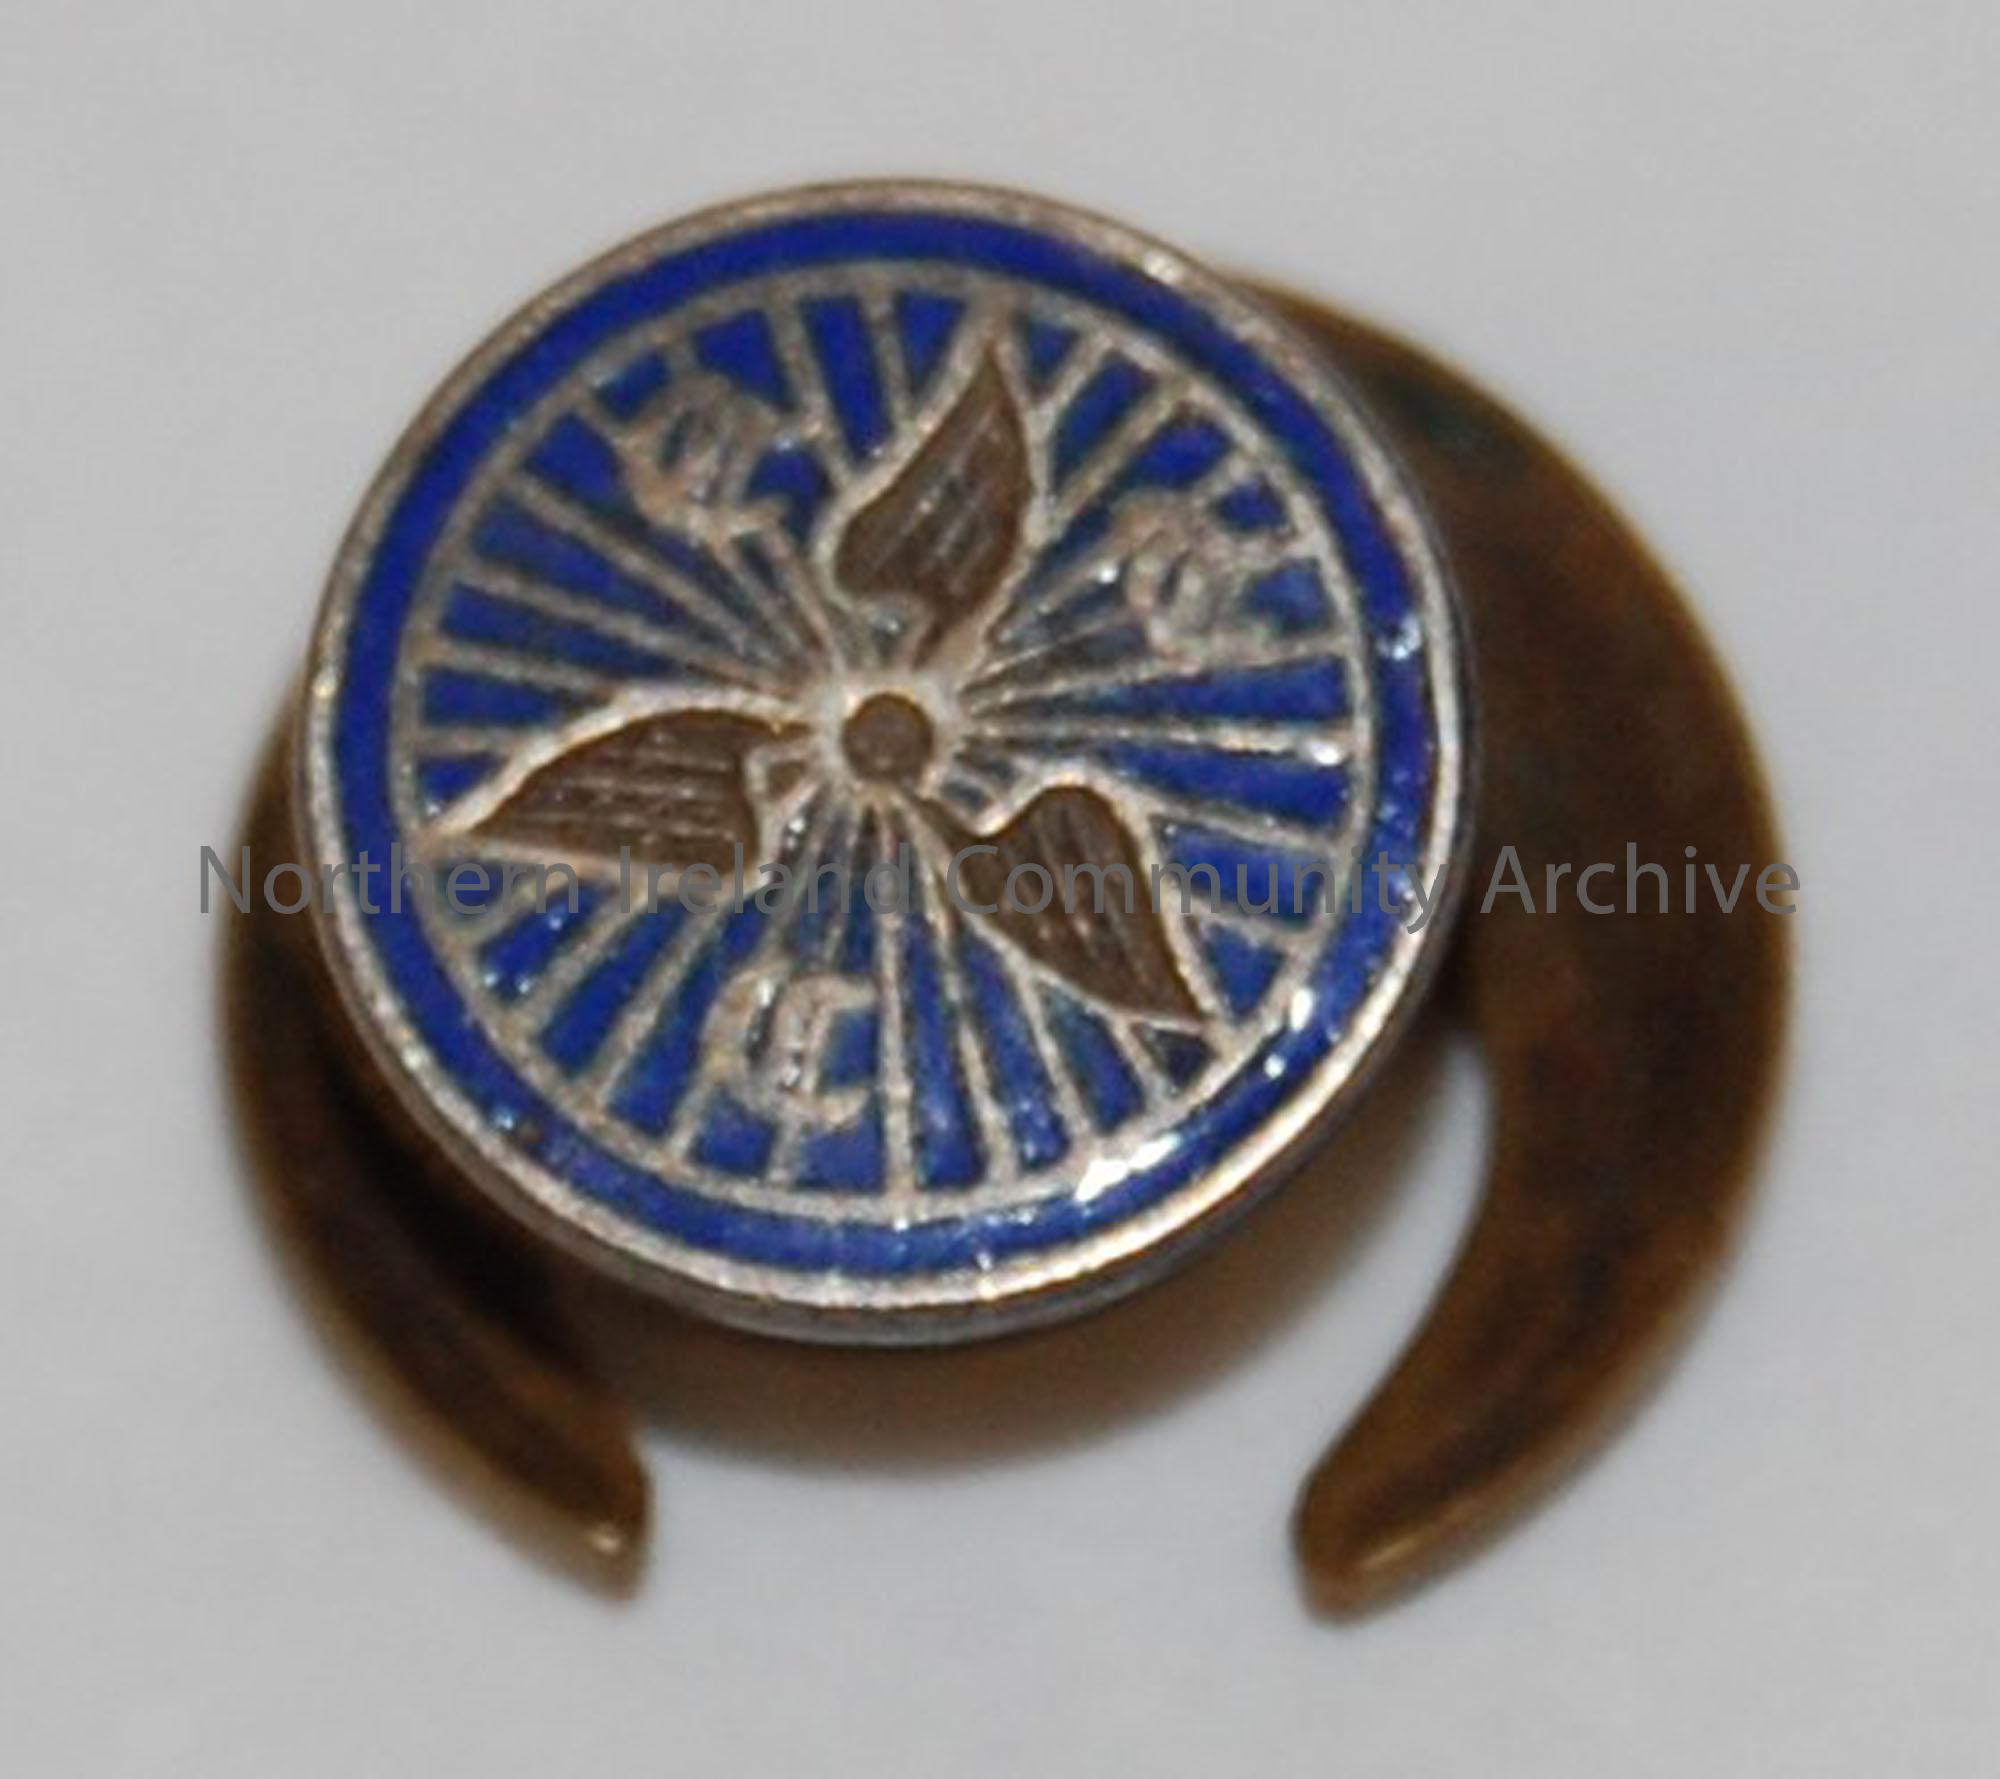 Cycle Touring Club badge. Brass with blue enamel background. 3 ‘leaf’ shape design with letters C, T, C.